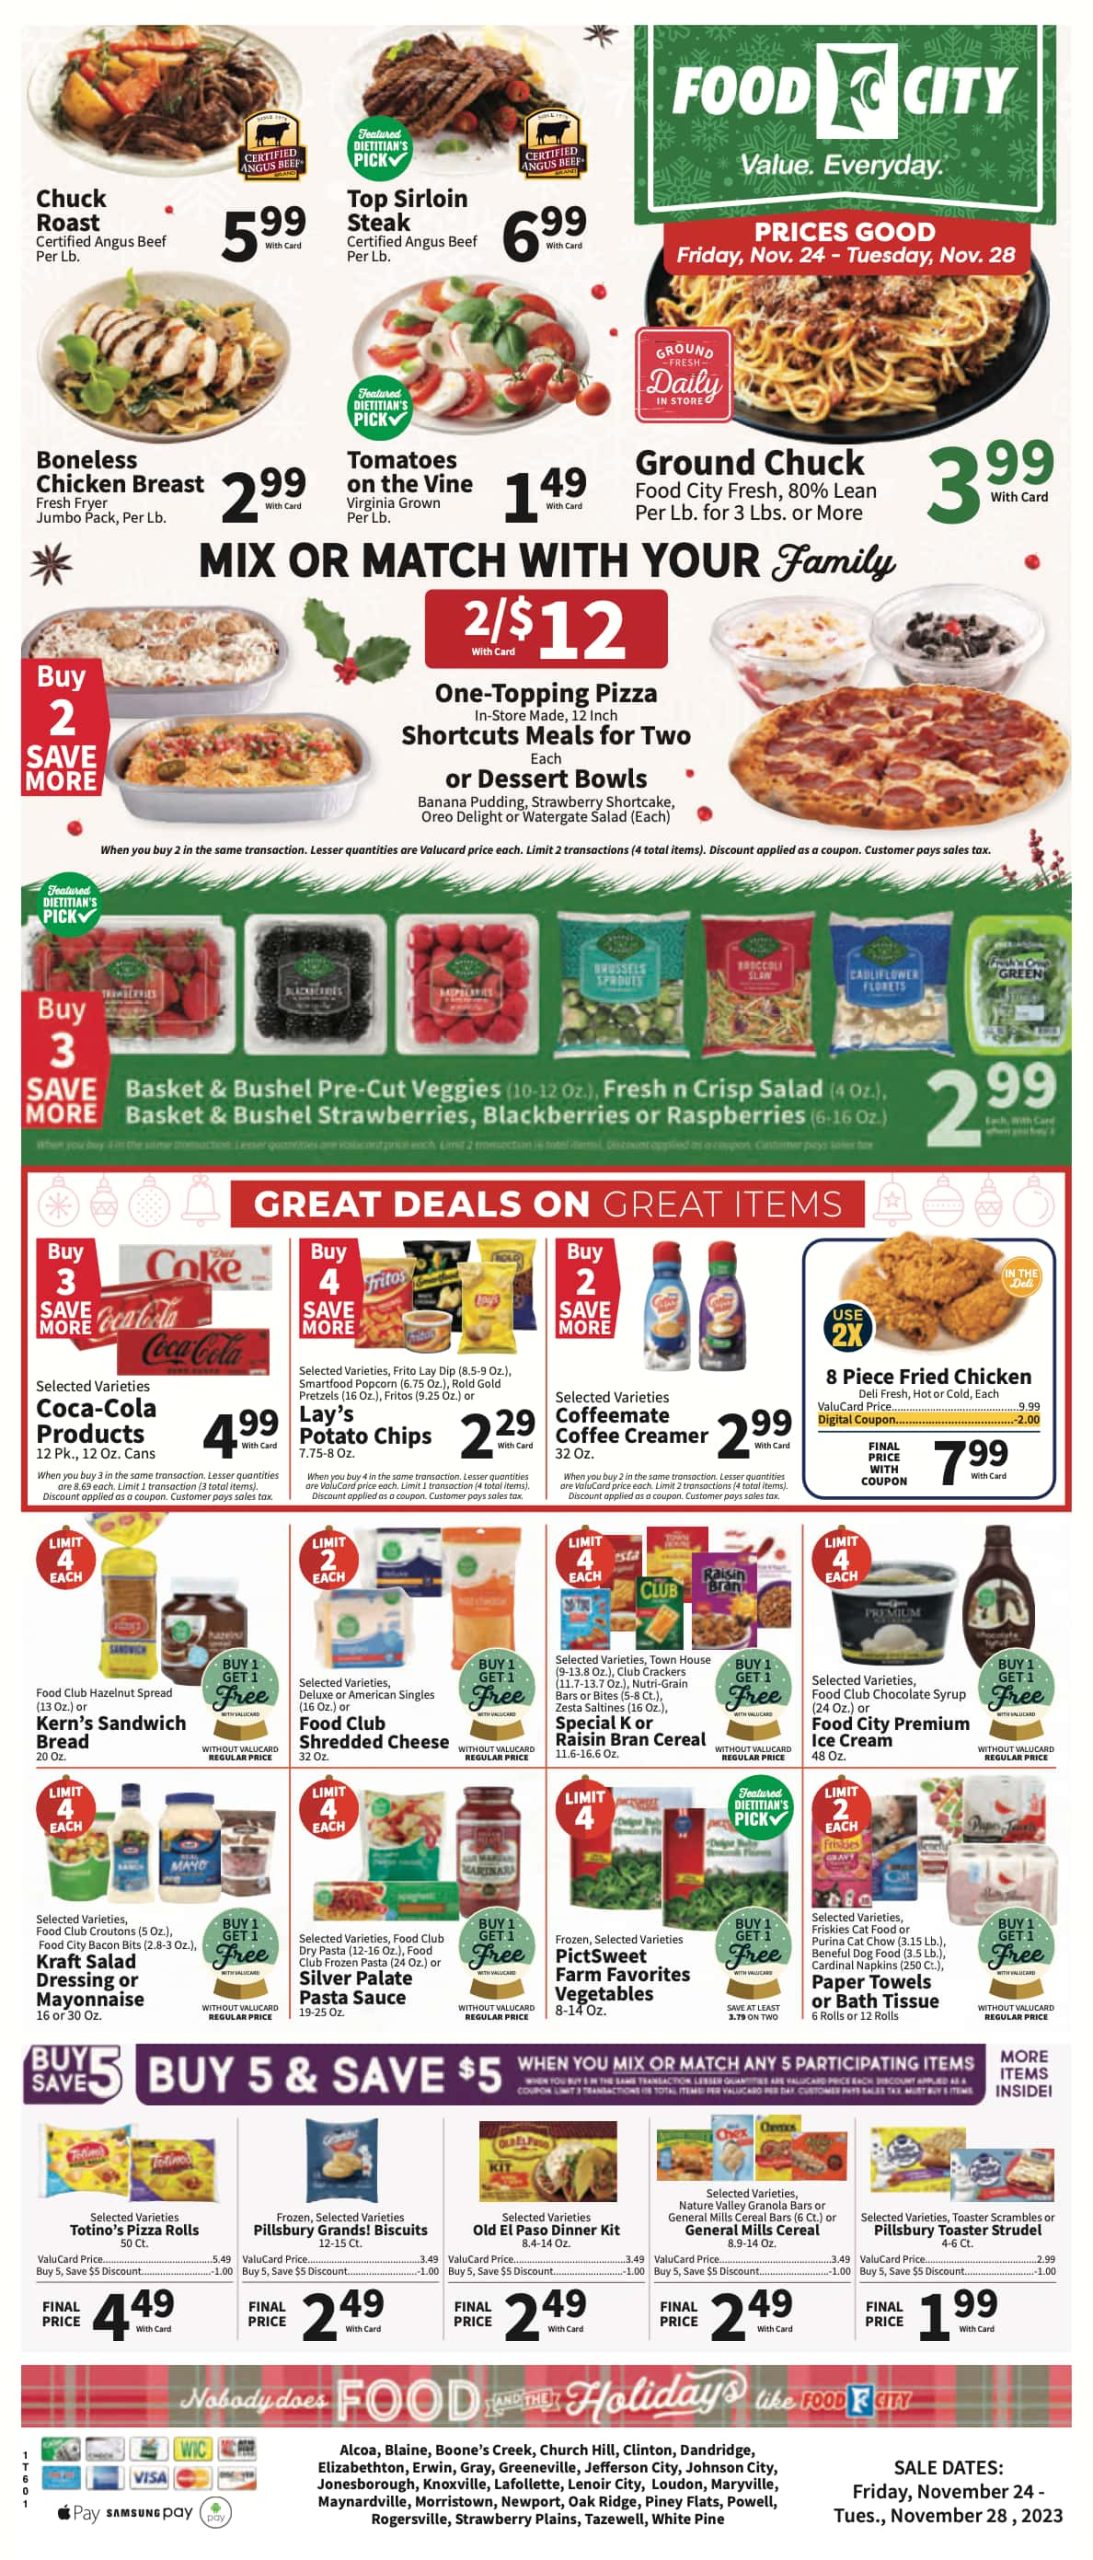 Food City Black Friday Deals 2023 1 – food city ad 1 2 scaled